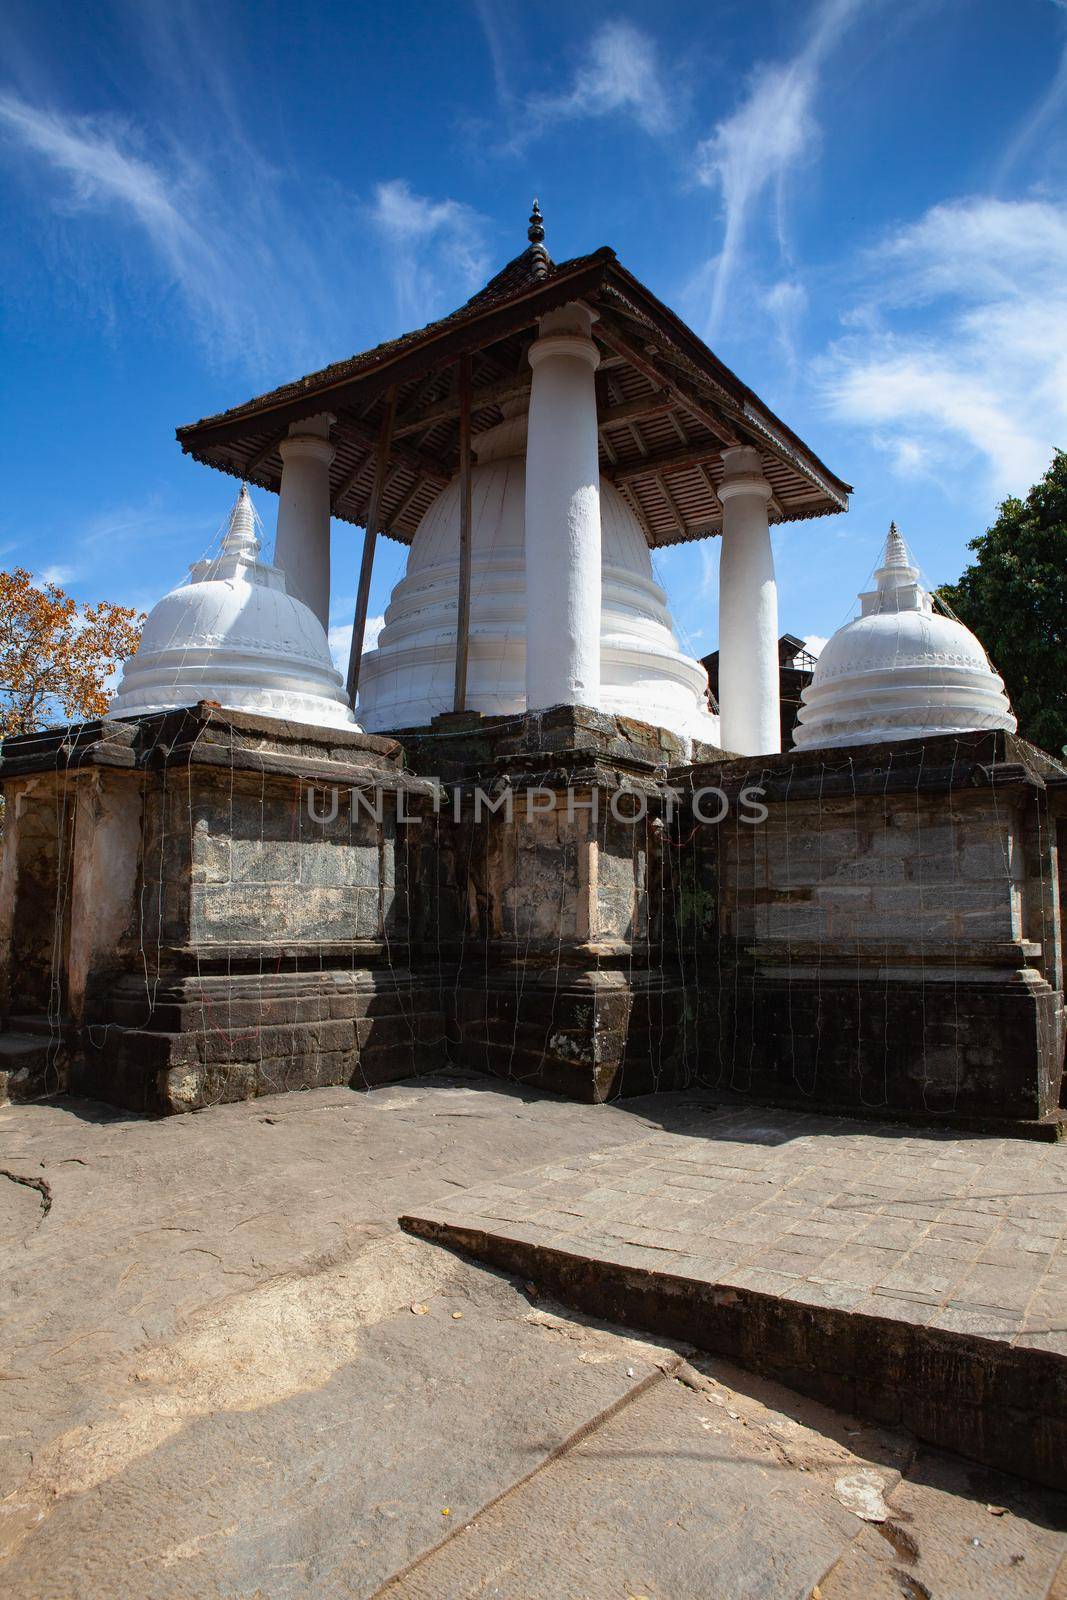 Gadaladenyia Vihara is an ancient Buddhist temple situated in Pilimathalawa, Kandy, Sri Lanka. Gadaladeniya is situated on top of a rocky outcrop.